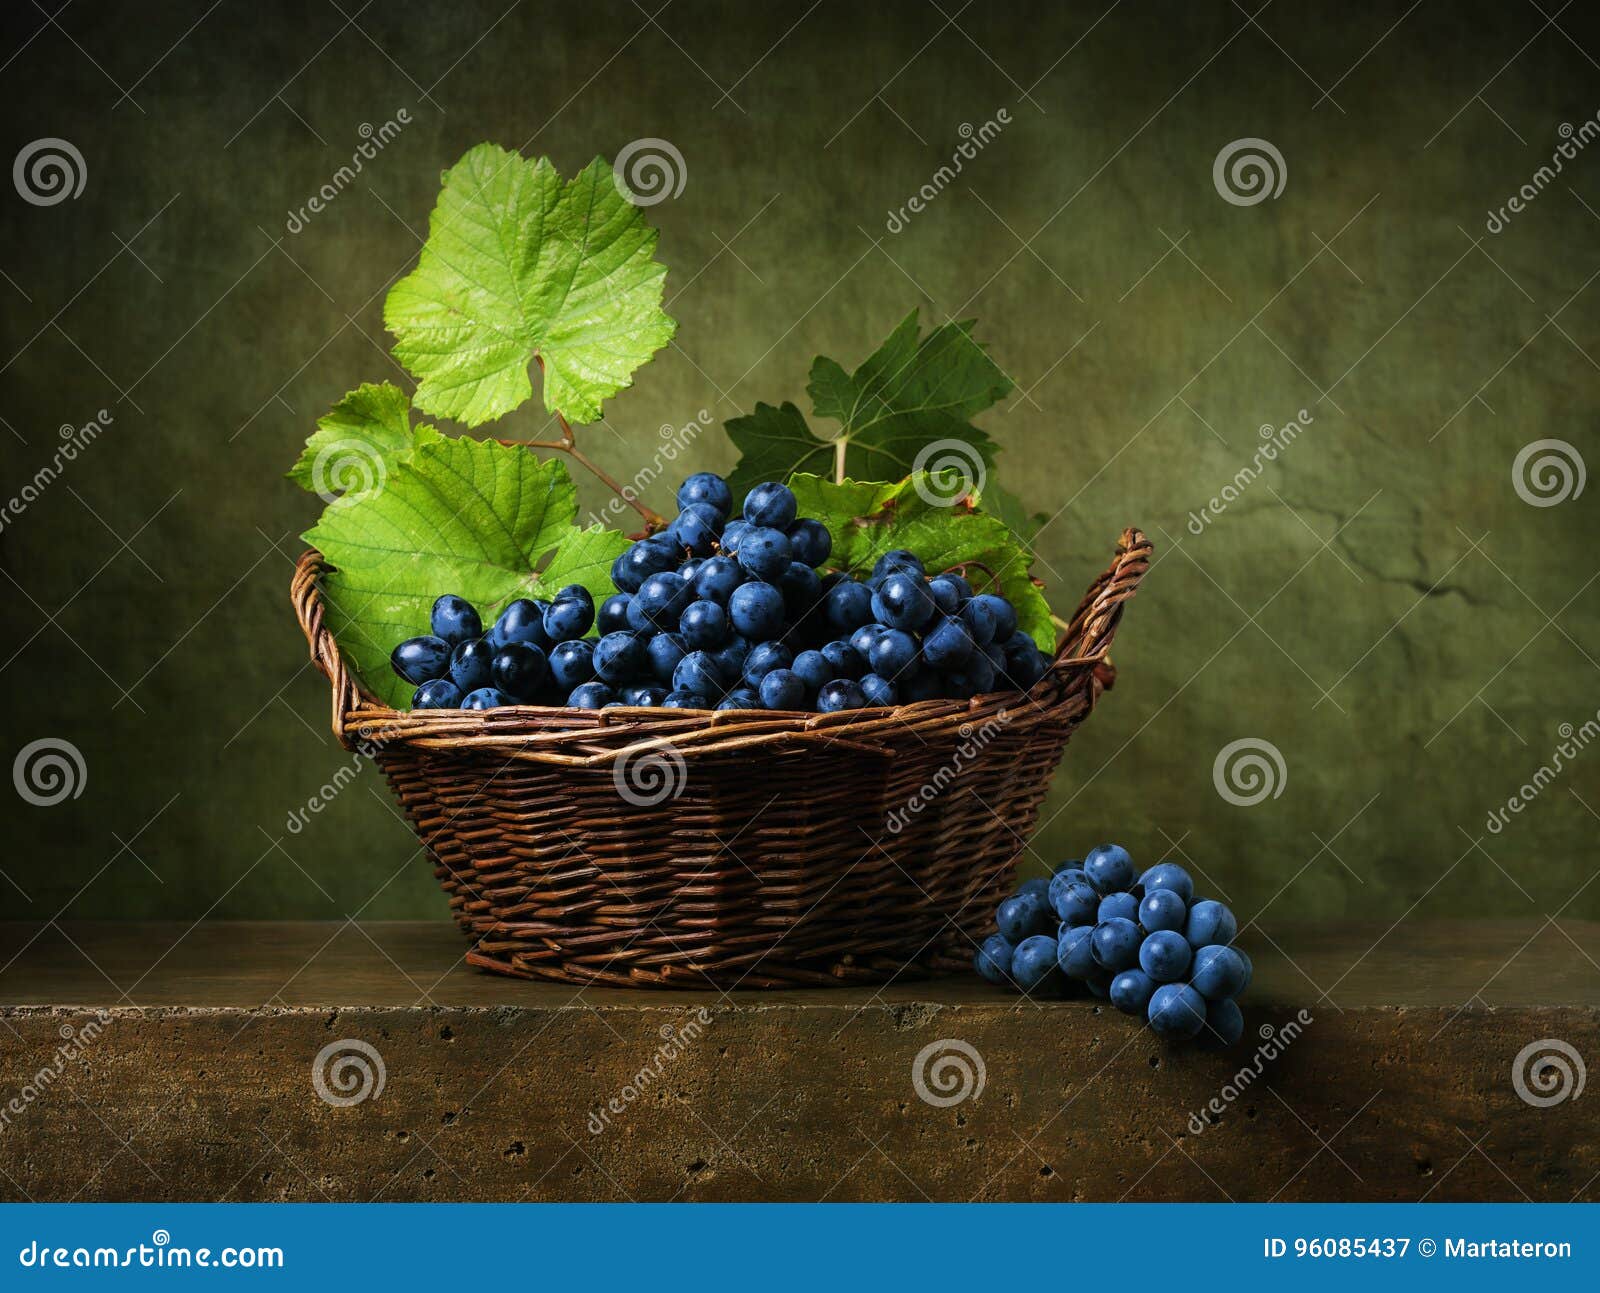 still life with grapes in basket